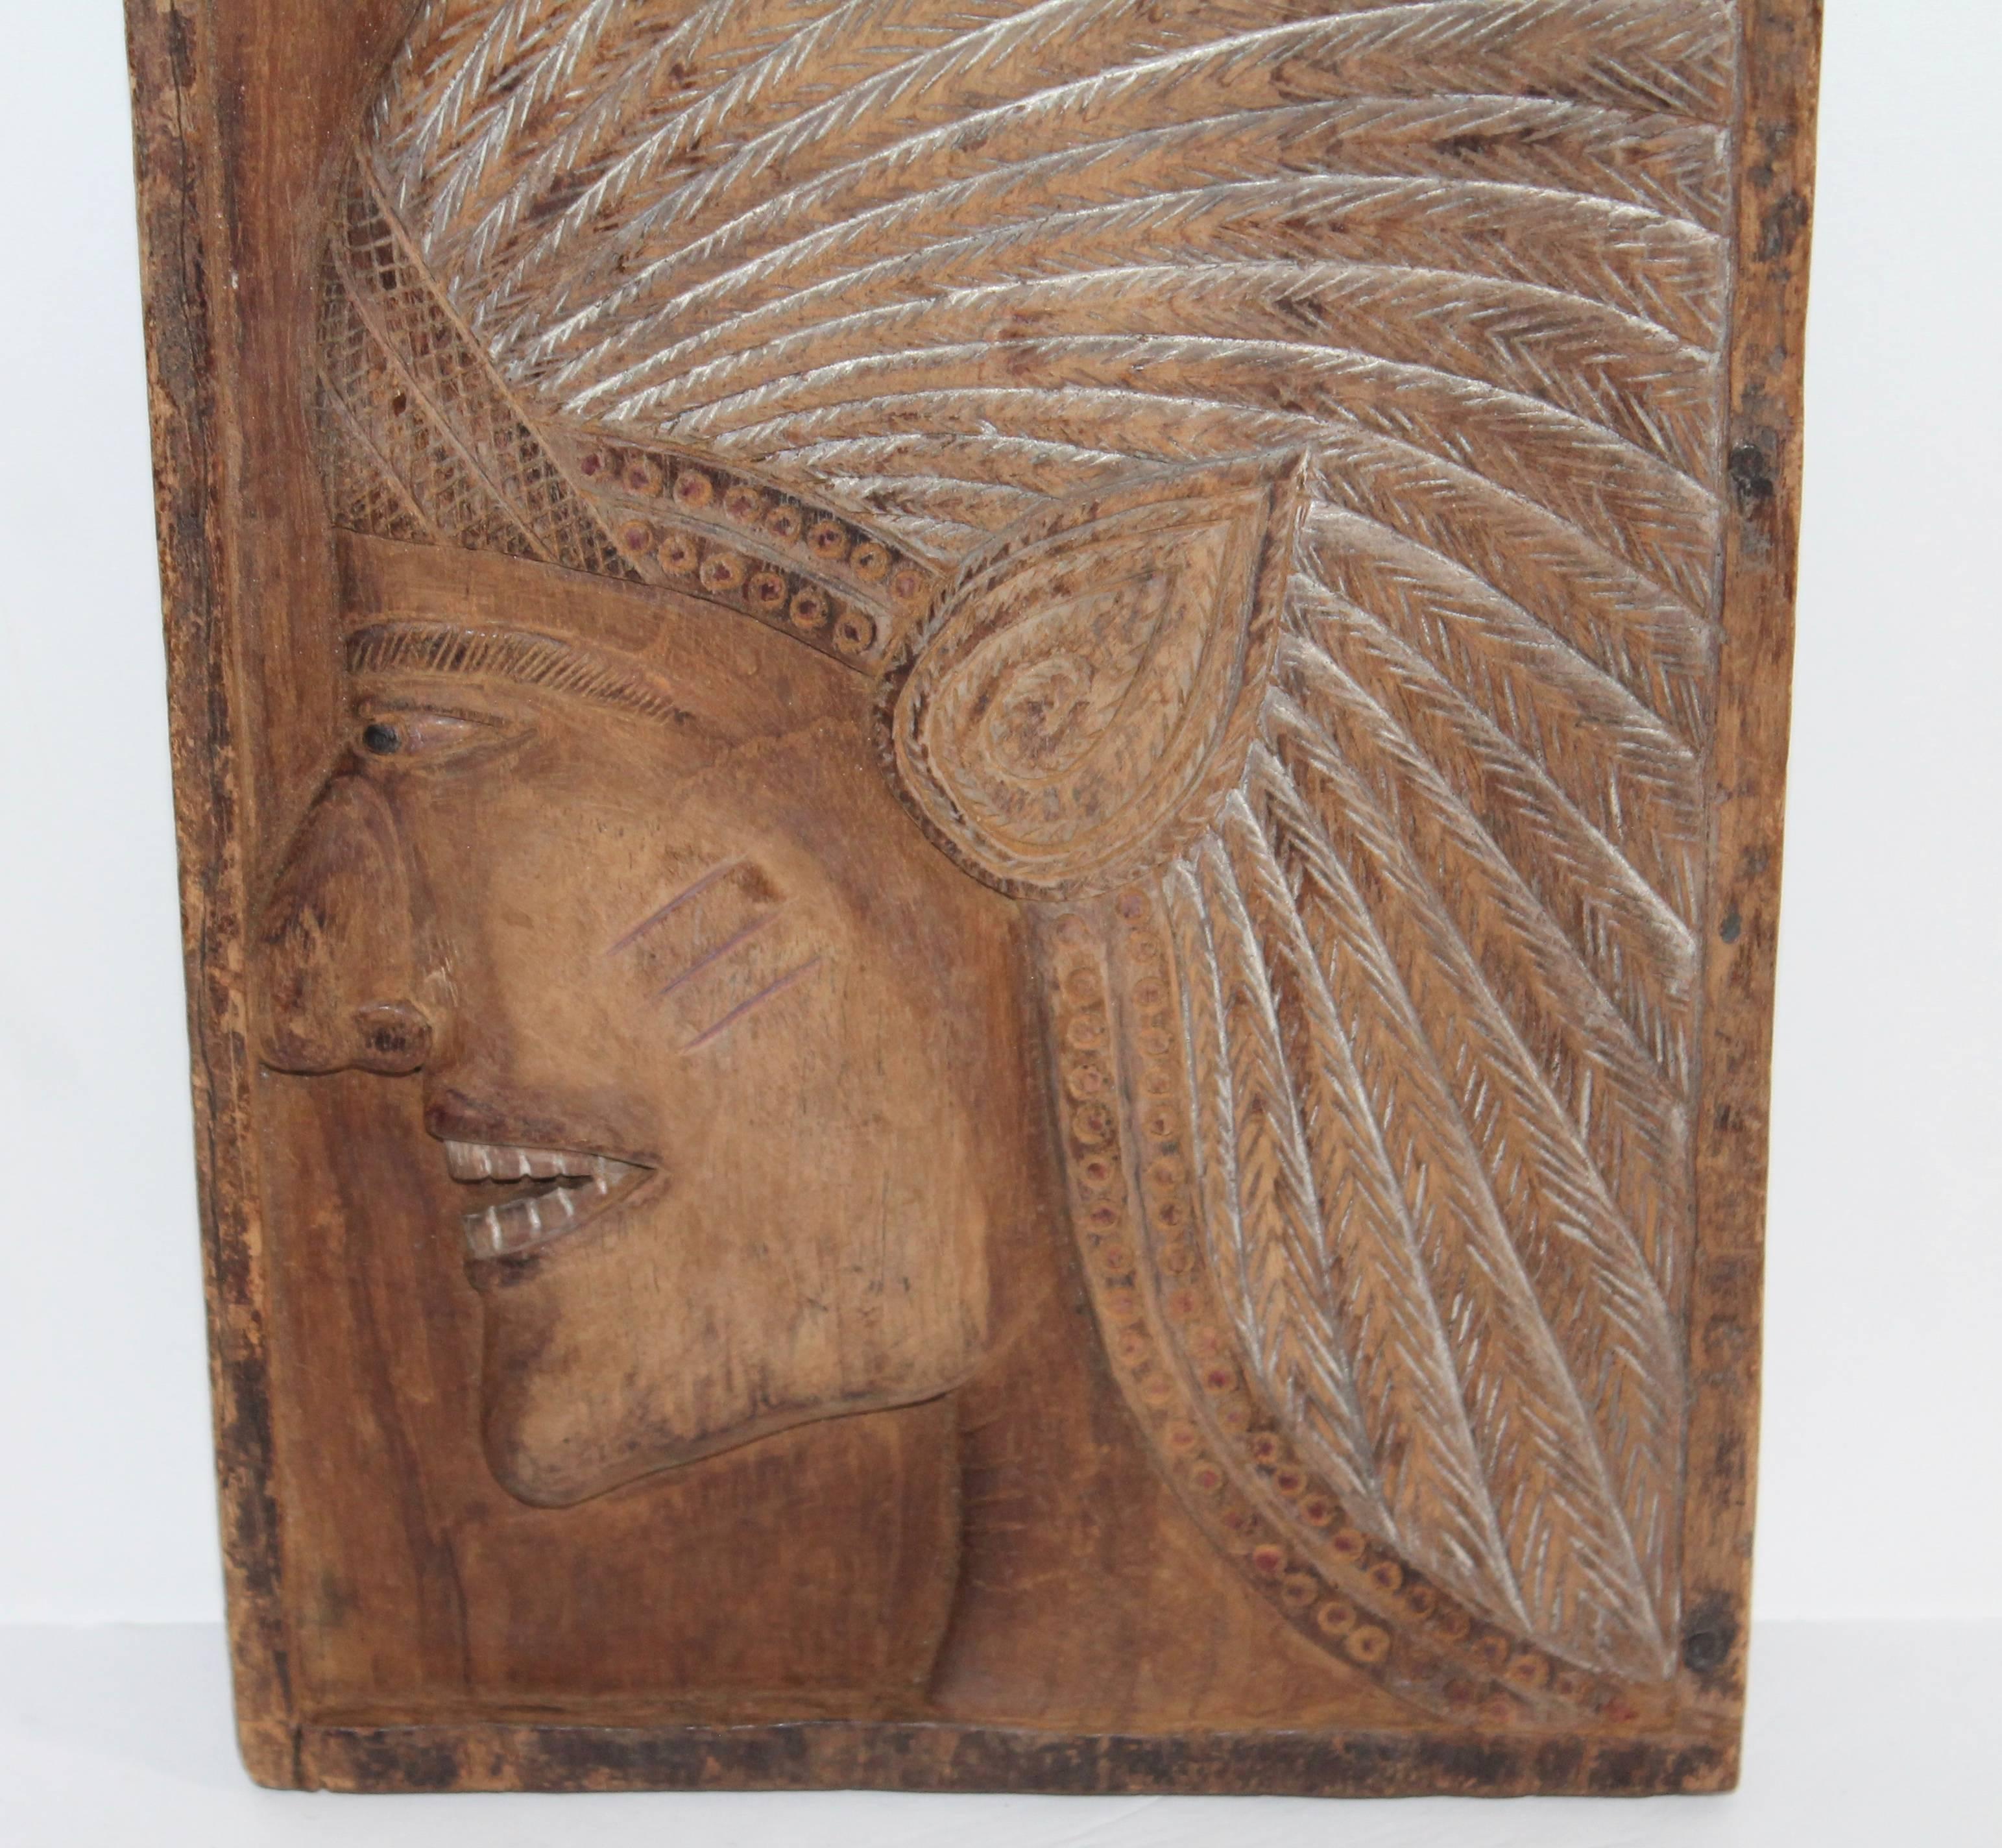 This very folky hand-carved Indian chief plaque is in great condition. This folky Indian is very well detailed carving. The condition is very good.